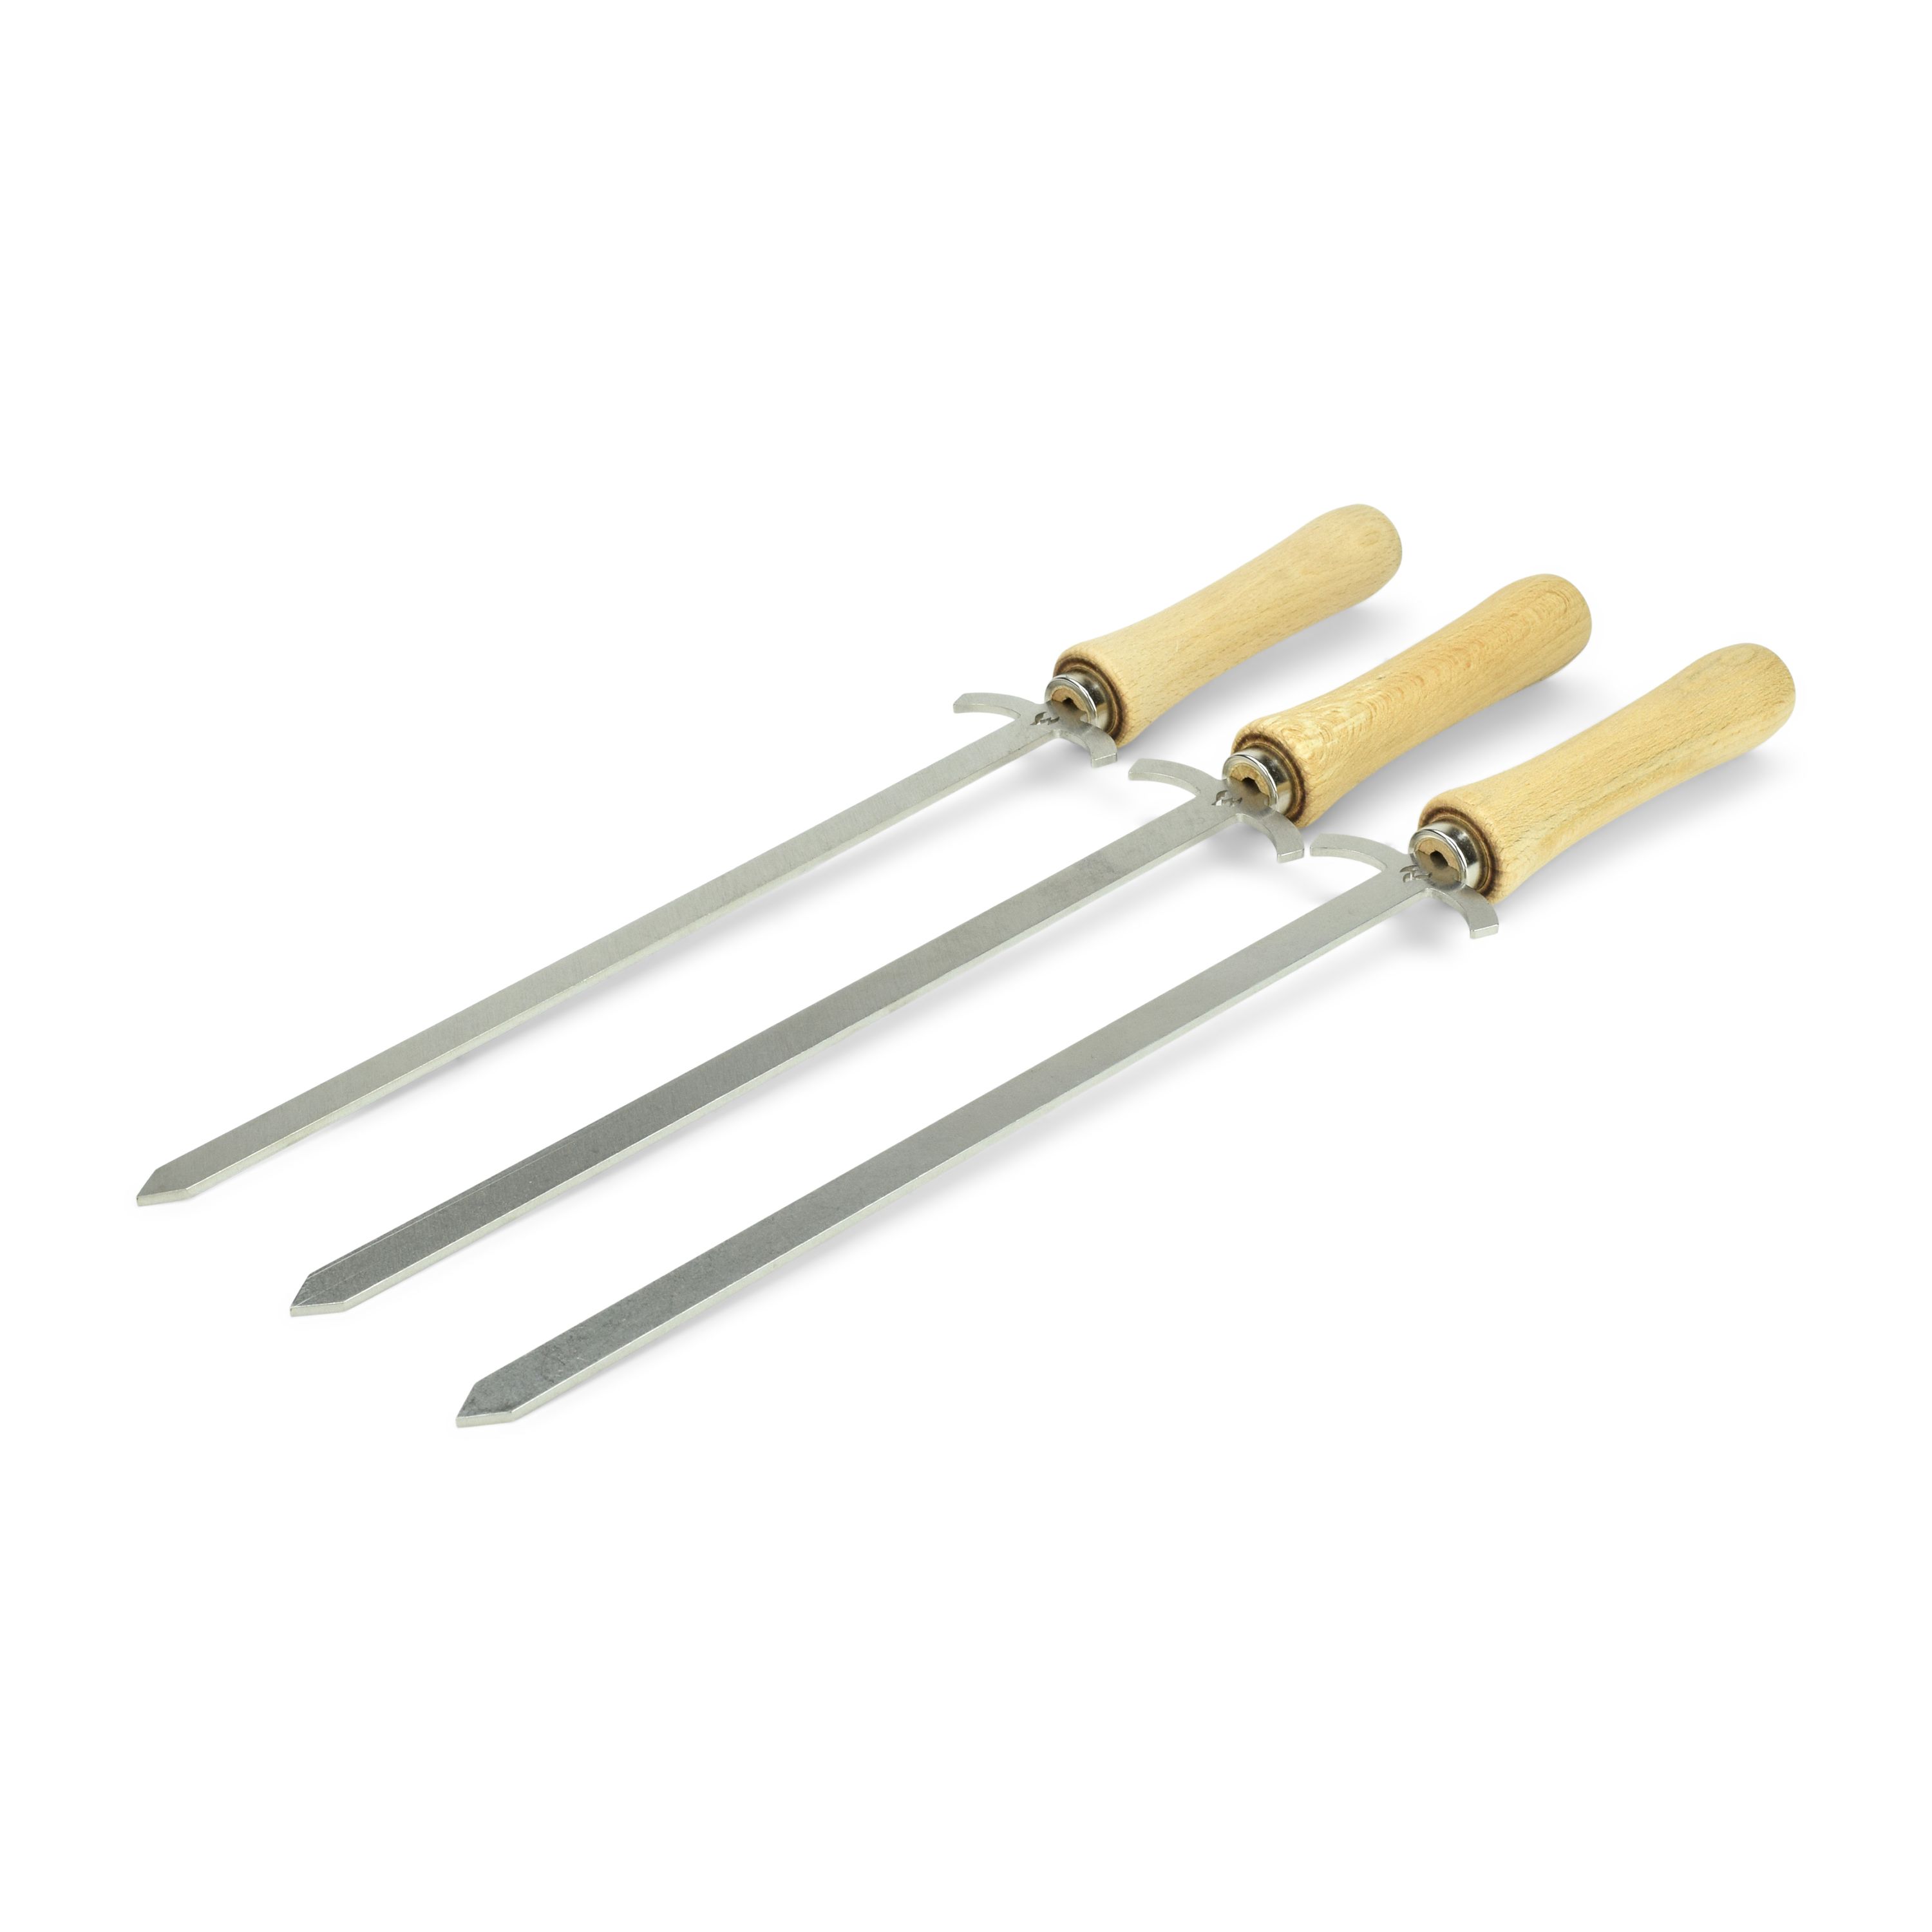 3 stainless steel barbecue swords